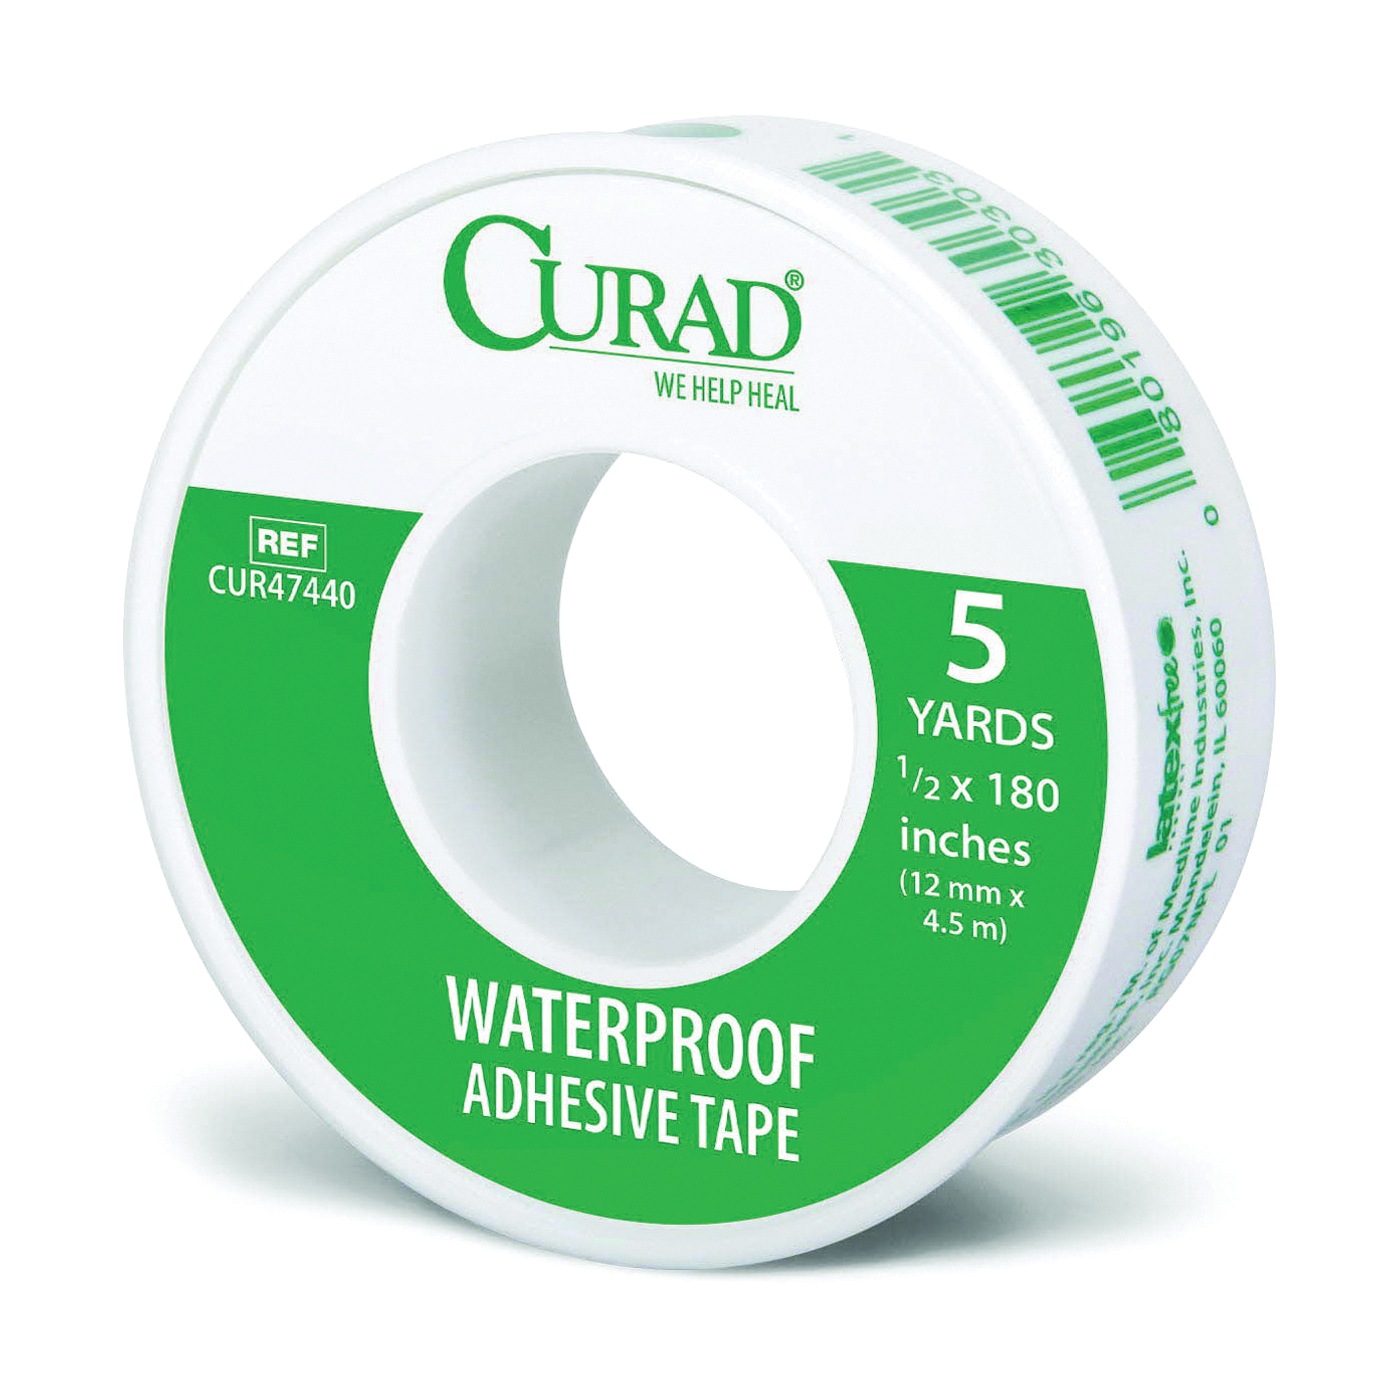 CUR47440 Adhesive Tape, 1/2 in W, 5 yd L, Cotton/Polyethylene Bandage, Heat-Activated Adhesive